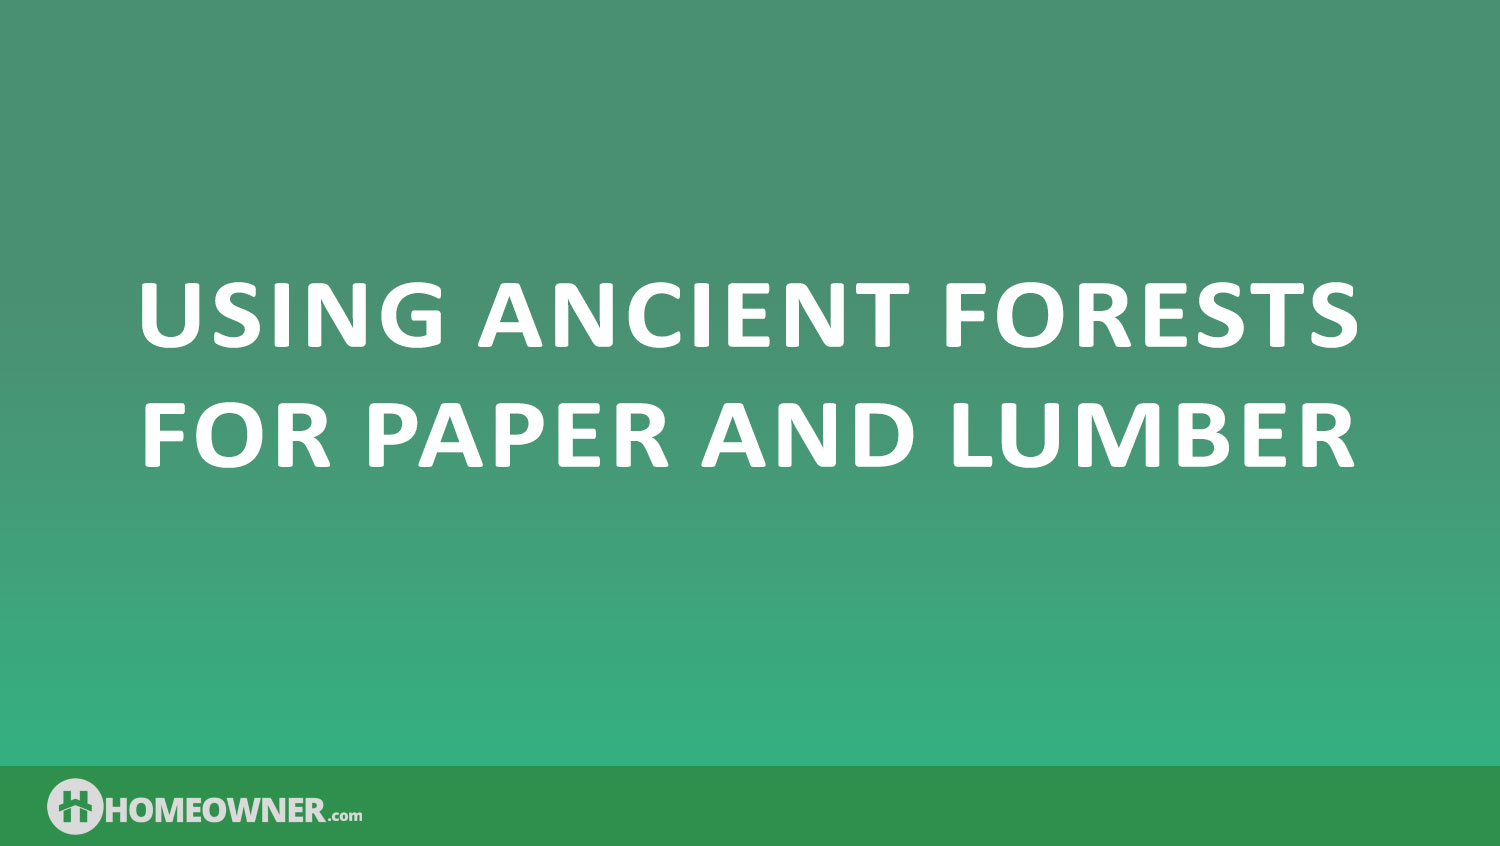 Using Ancient Forests for Paper and Lumber